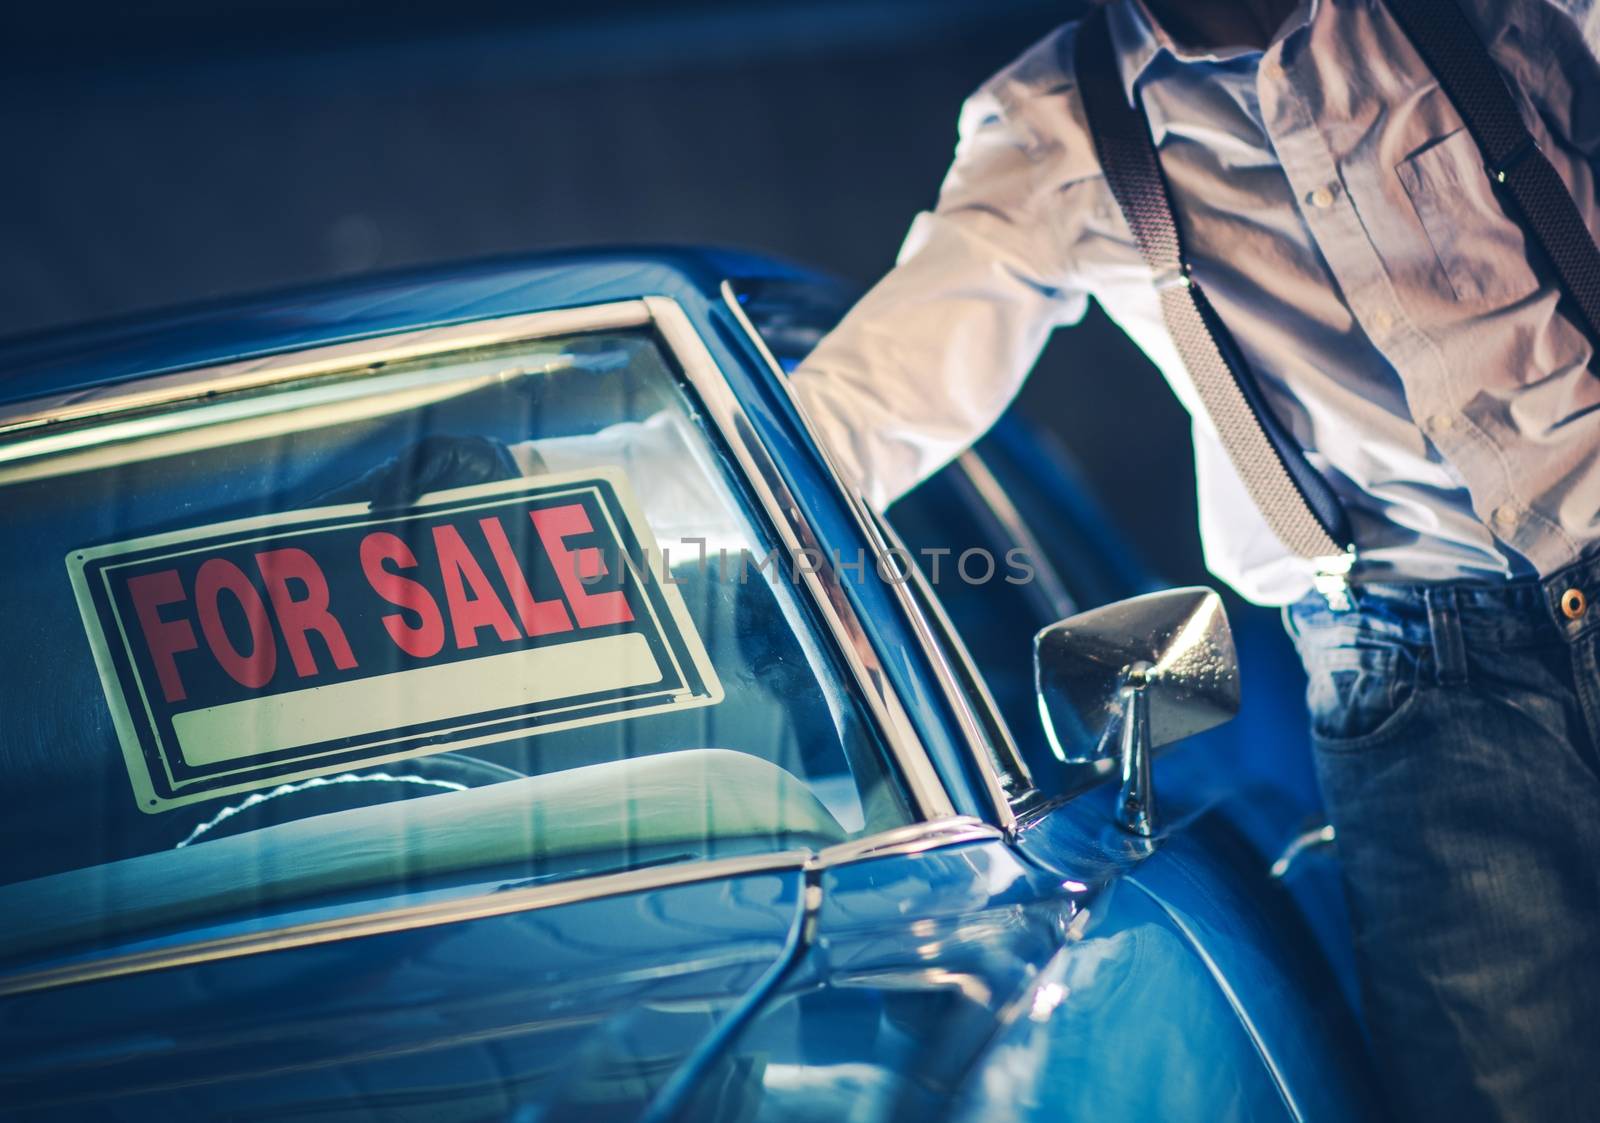 Men Putting For Sale Sign Under His Car Windshield. Selling Car Theme.